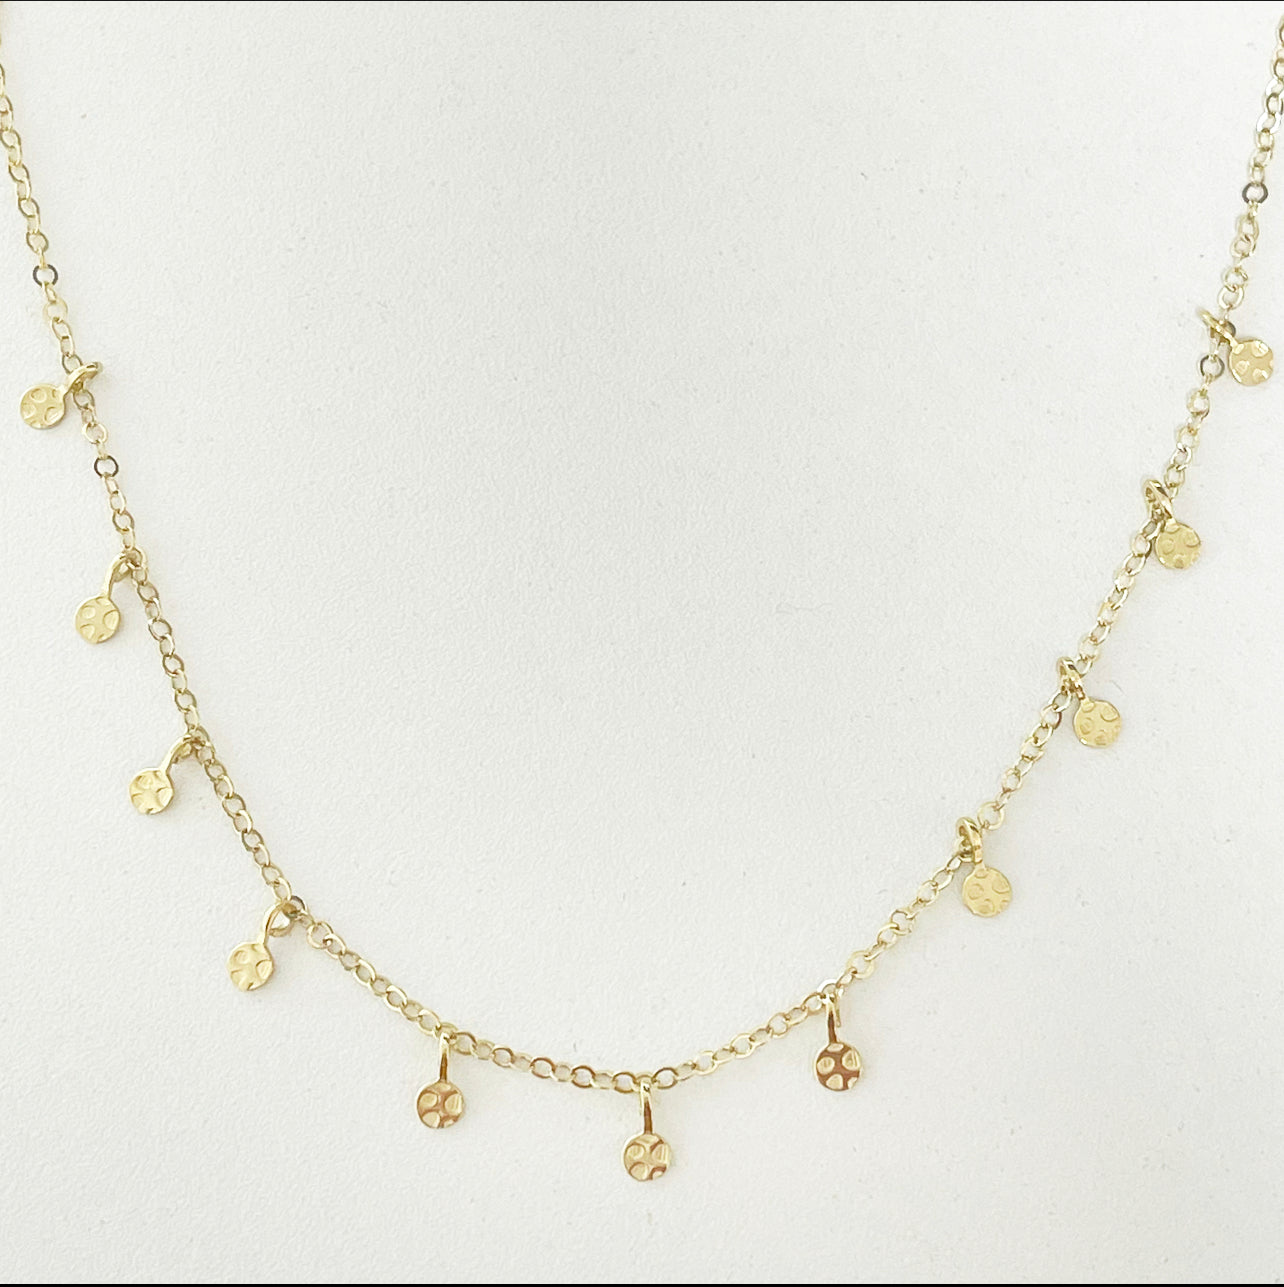 1392 - Solid Gold Necklace with Textured Drop Accents